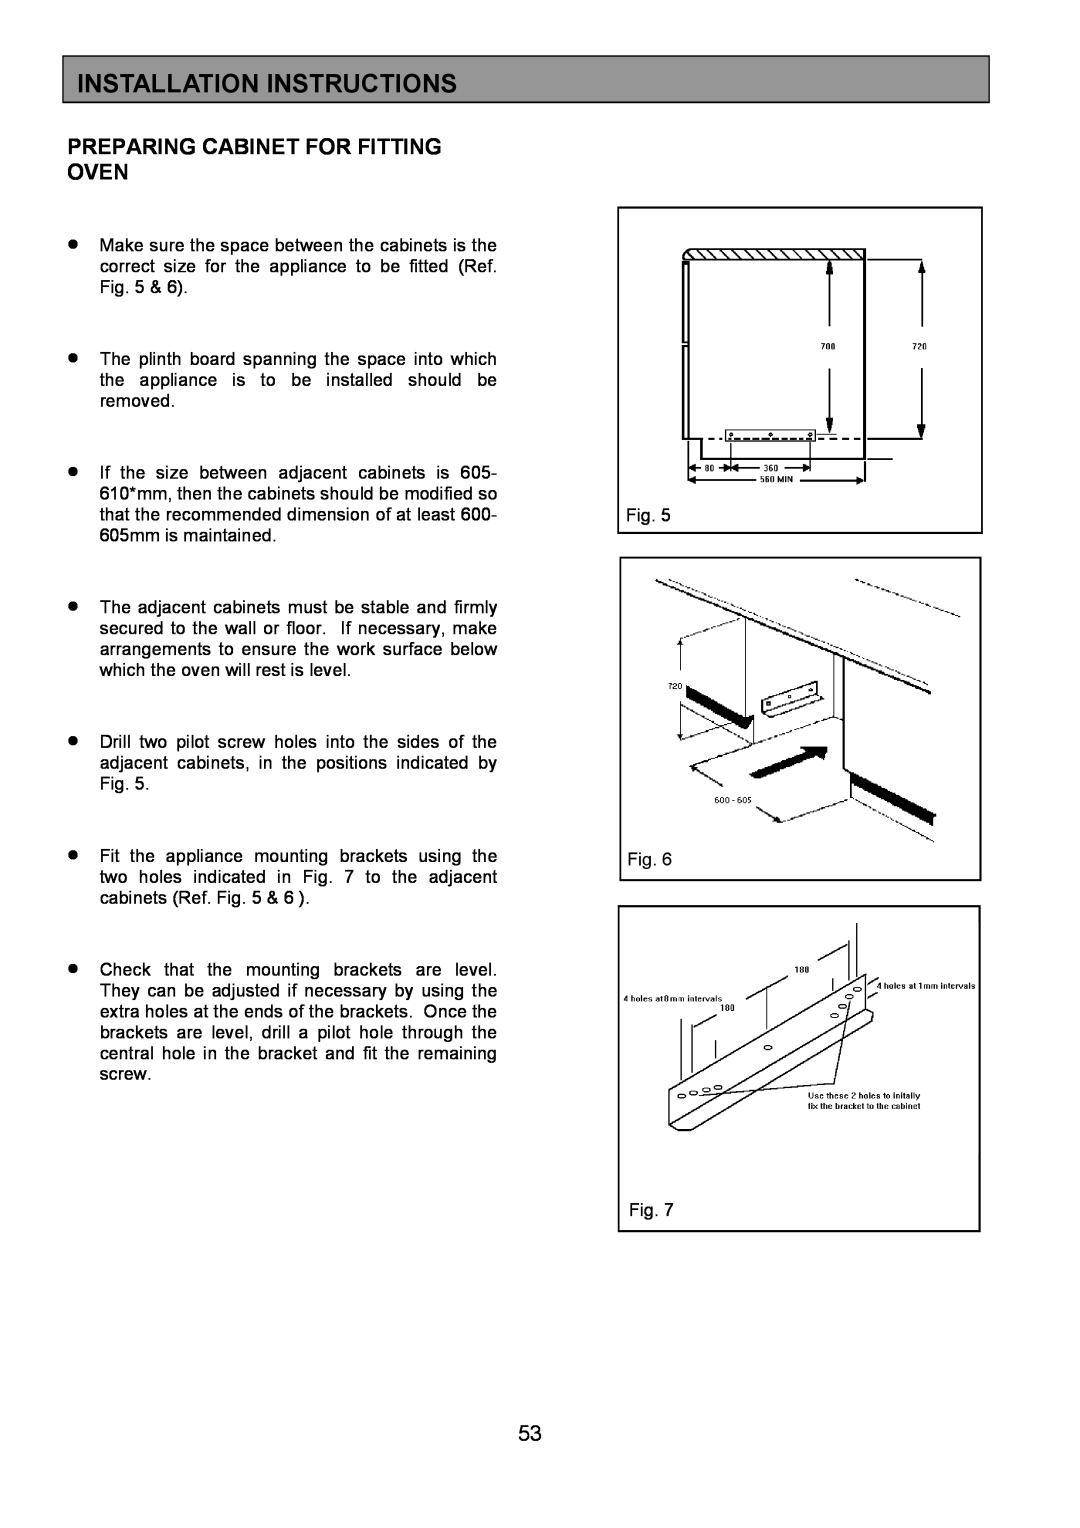 Zanussi 311608901 manual Preparing Cabinet For Fitting Oven, Installation Instructions 